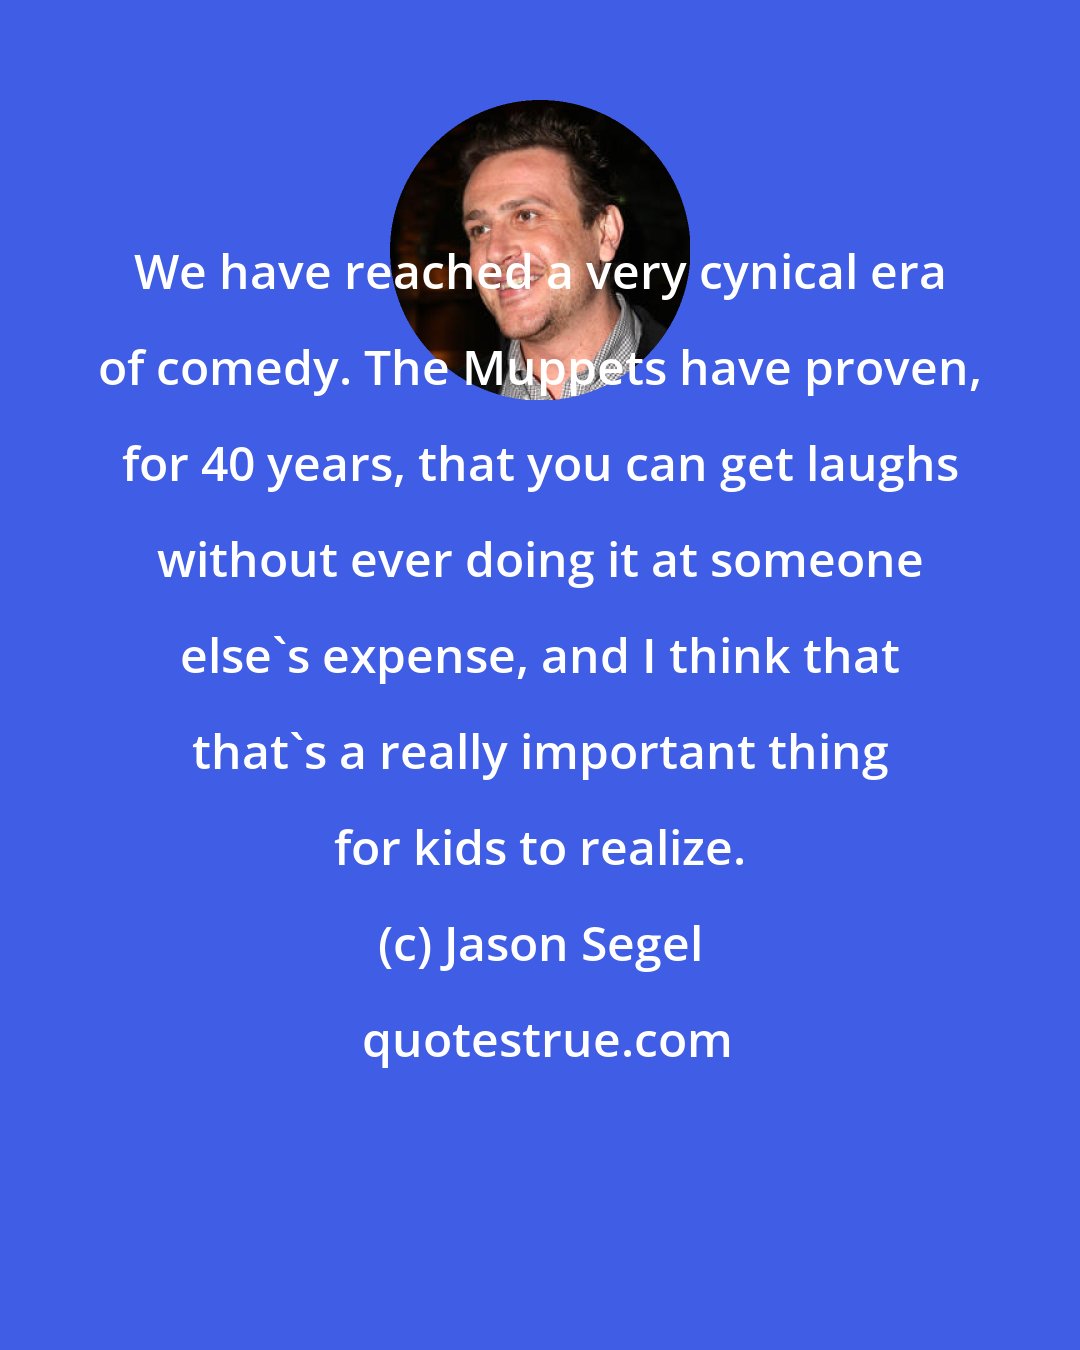 Jason Segel: We have reached a very cynical era of comedy. The Muppets have proven, for 40 years, that you can get laughs without ever doing it at someone else's expense, and I think that that's a really important thing for kids to realize.